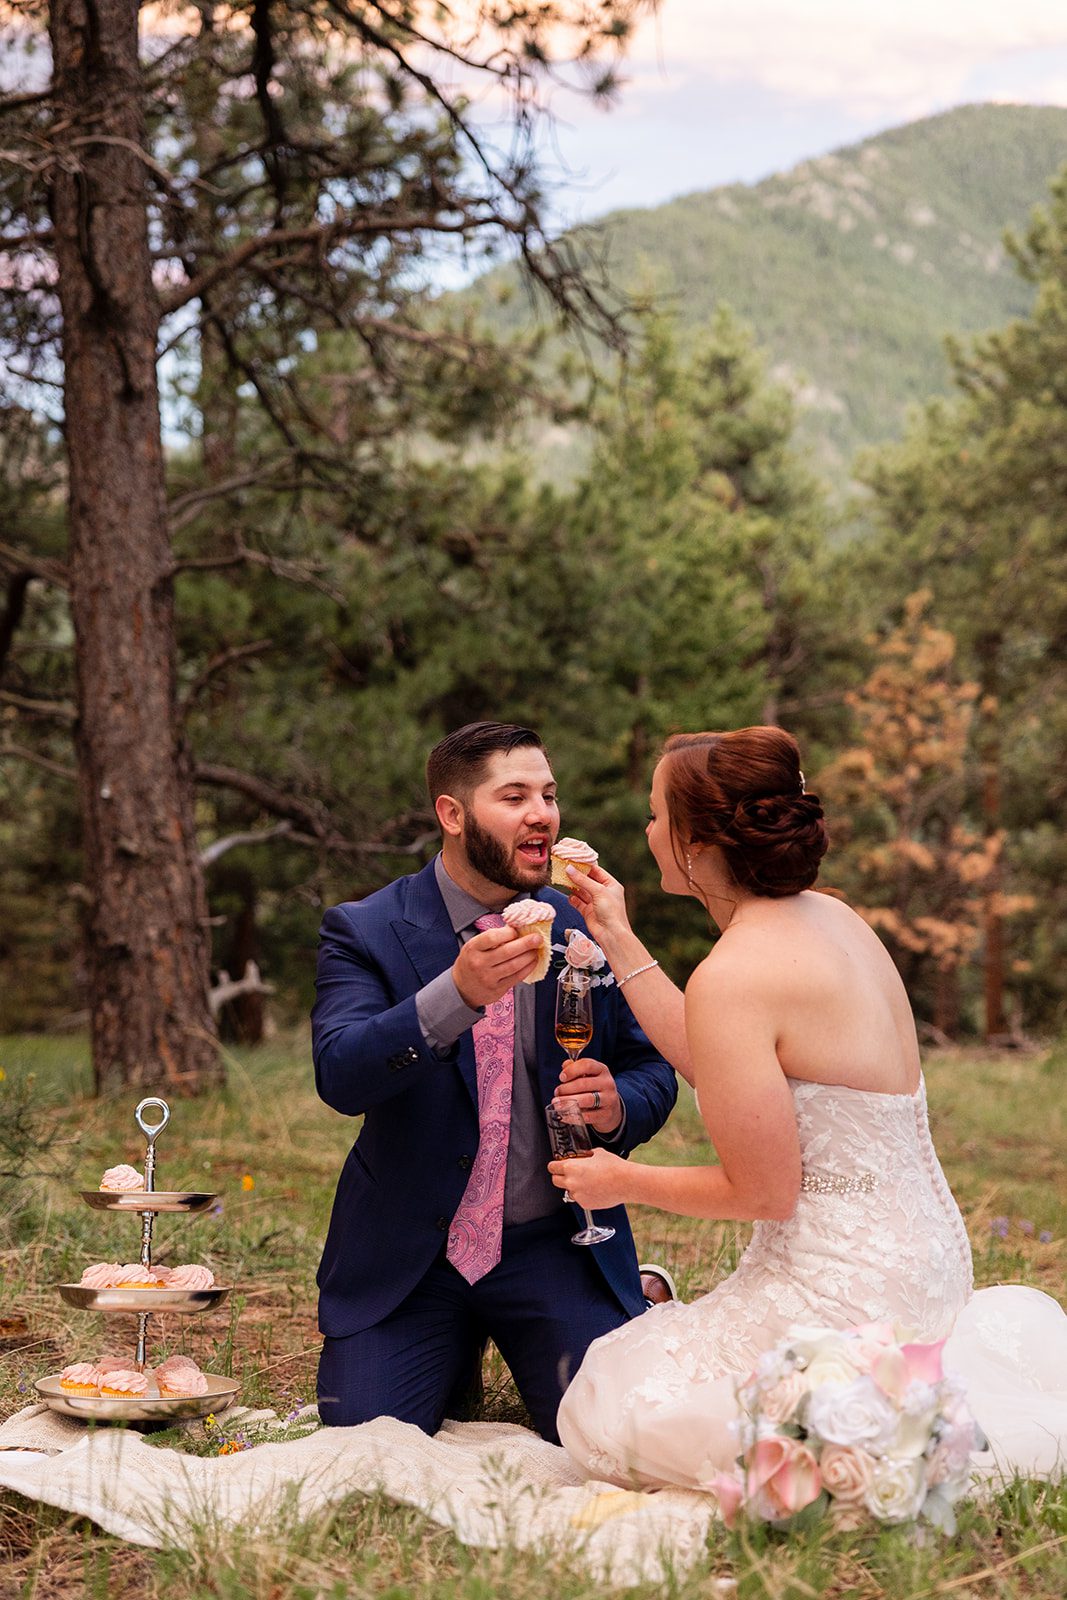 Bride and groom feeding each other cupcakes during their picnic at  their Boulder elopement with videography.